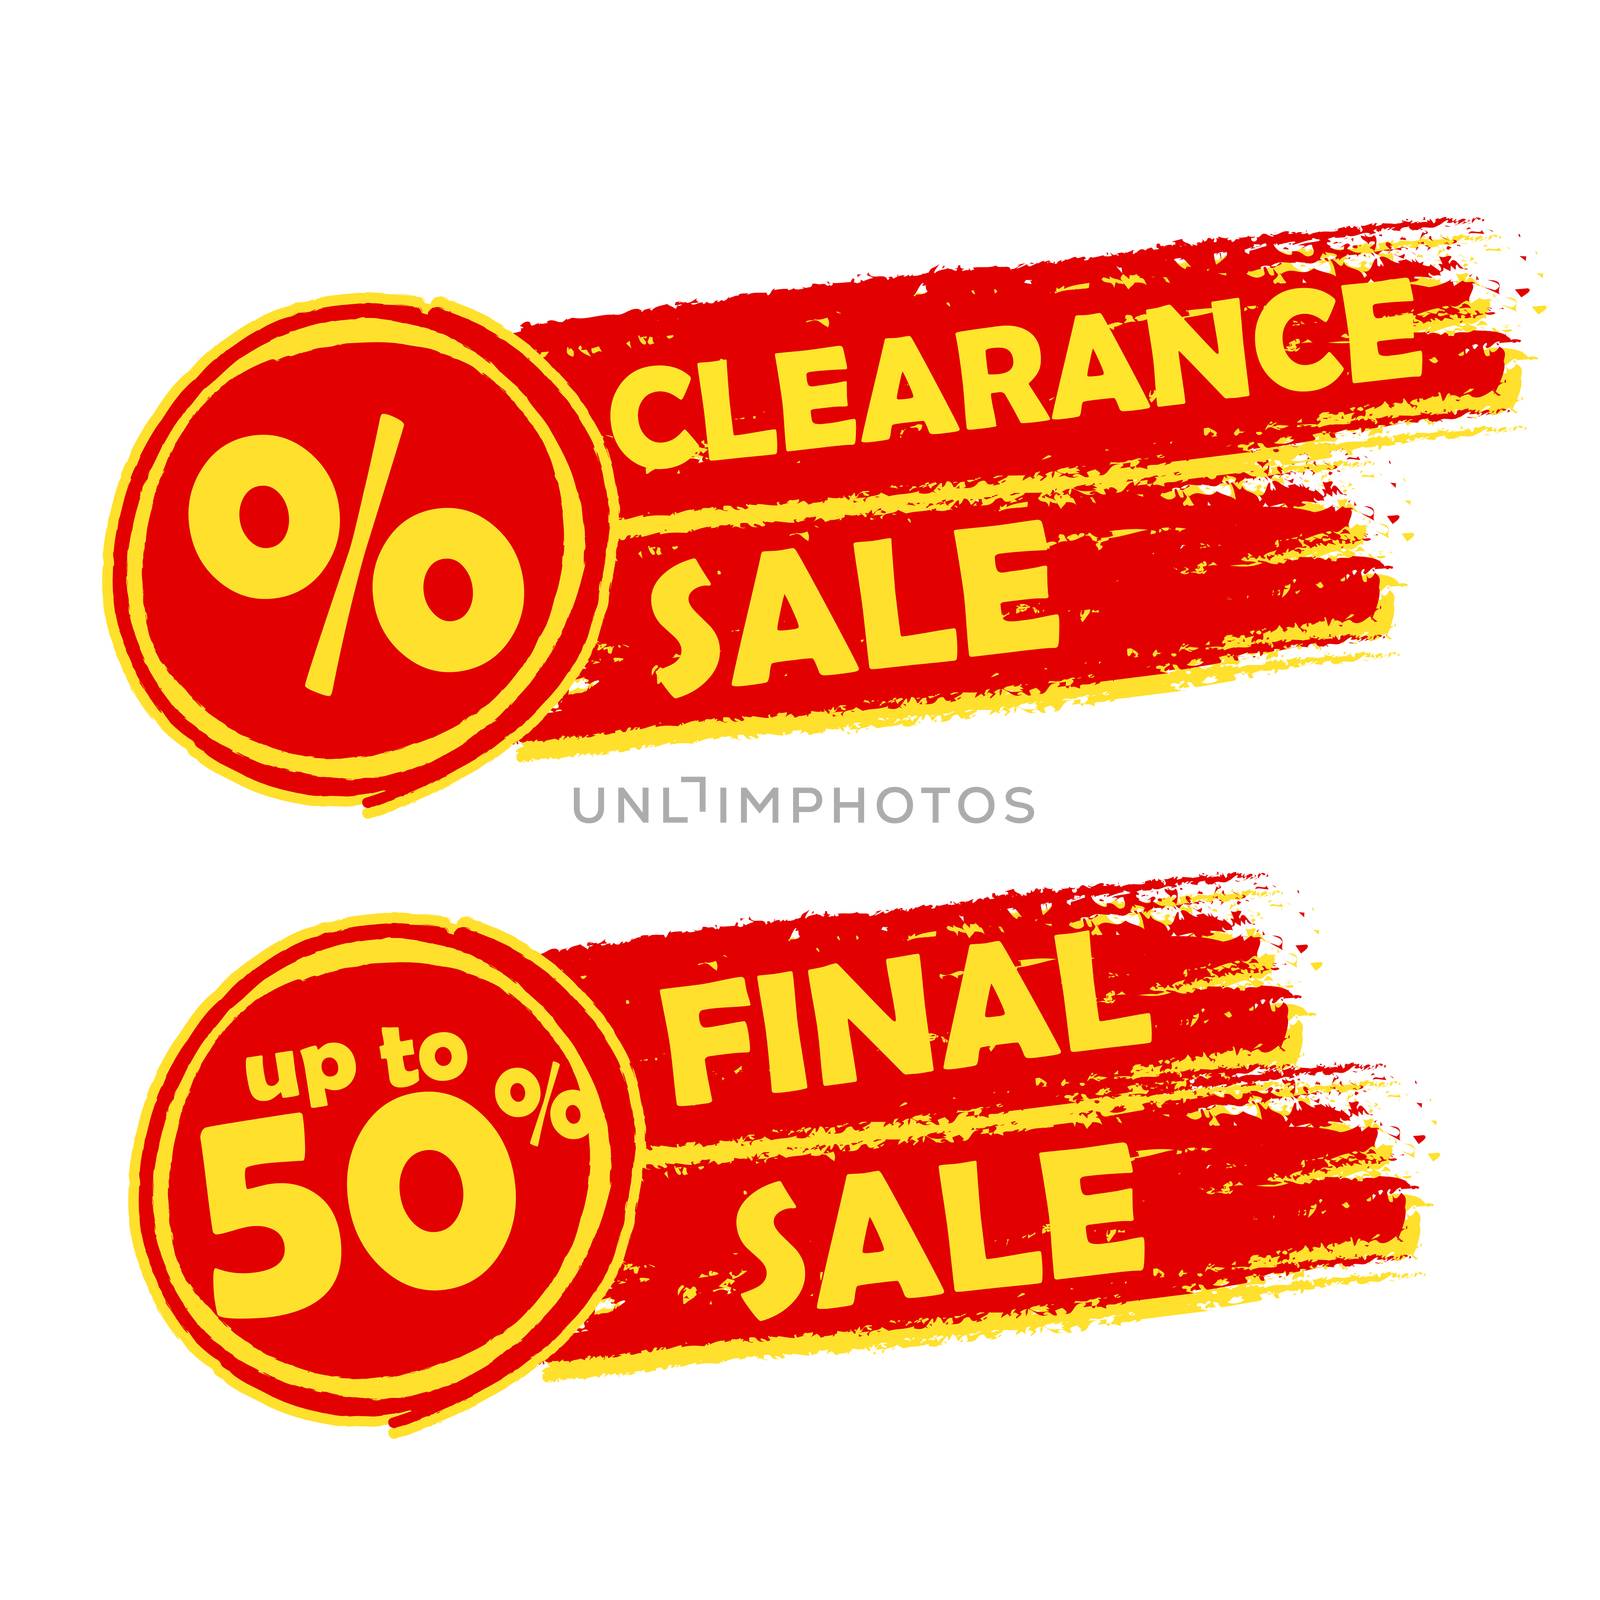 clearance and final sale with percent and 50 percentage signs, d by marinini